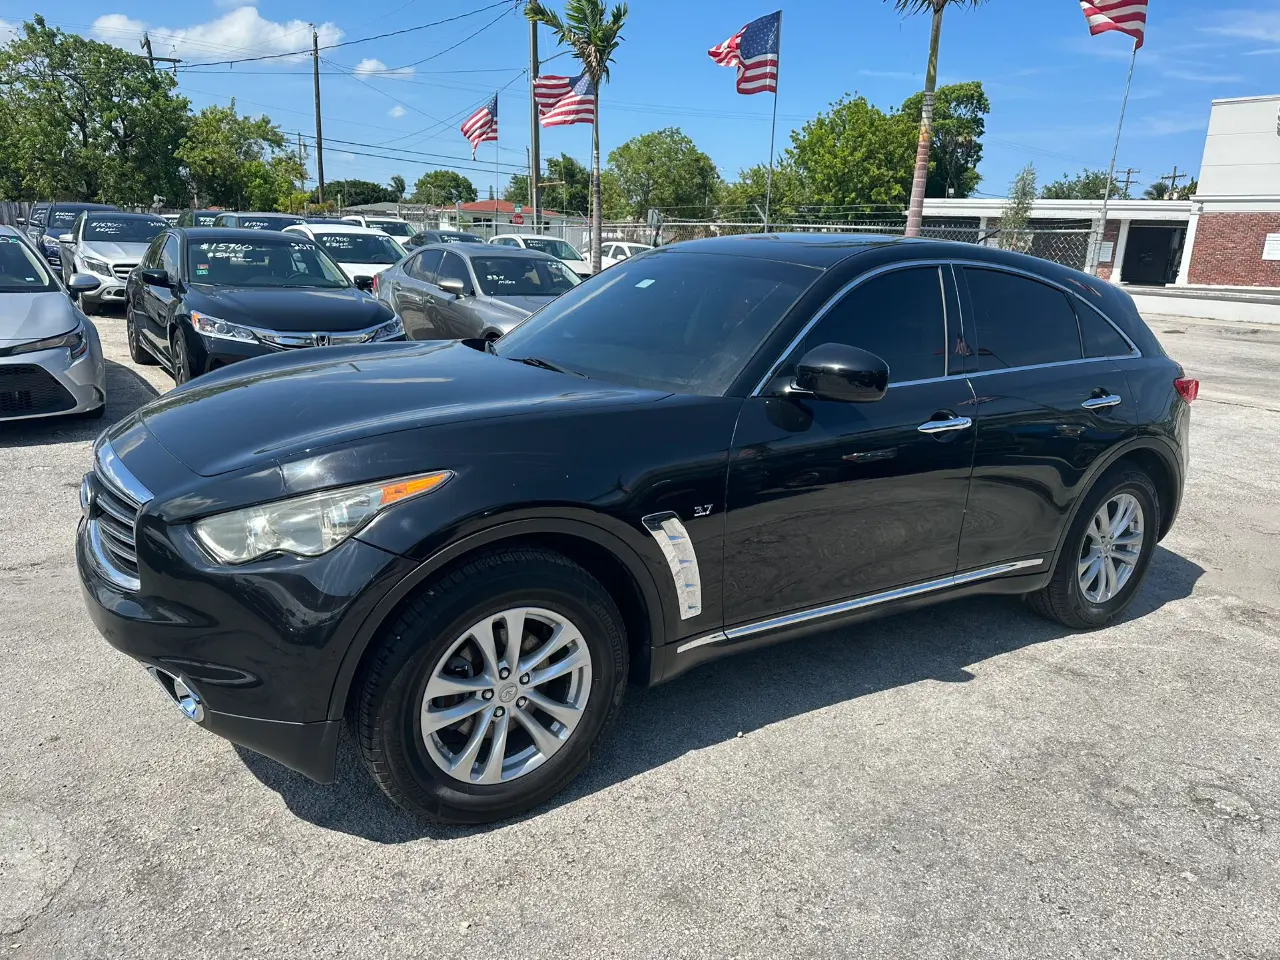 used 2016 Infiniti Qx70 - front view 3